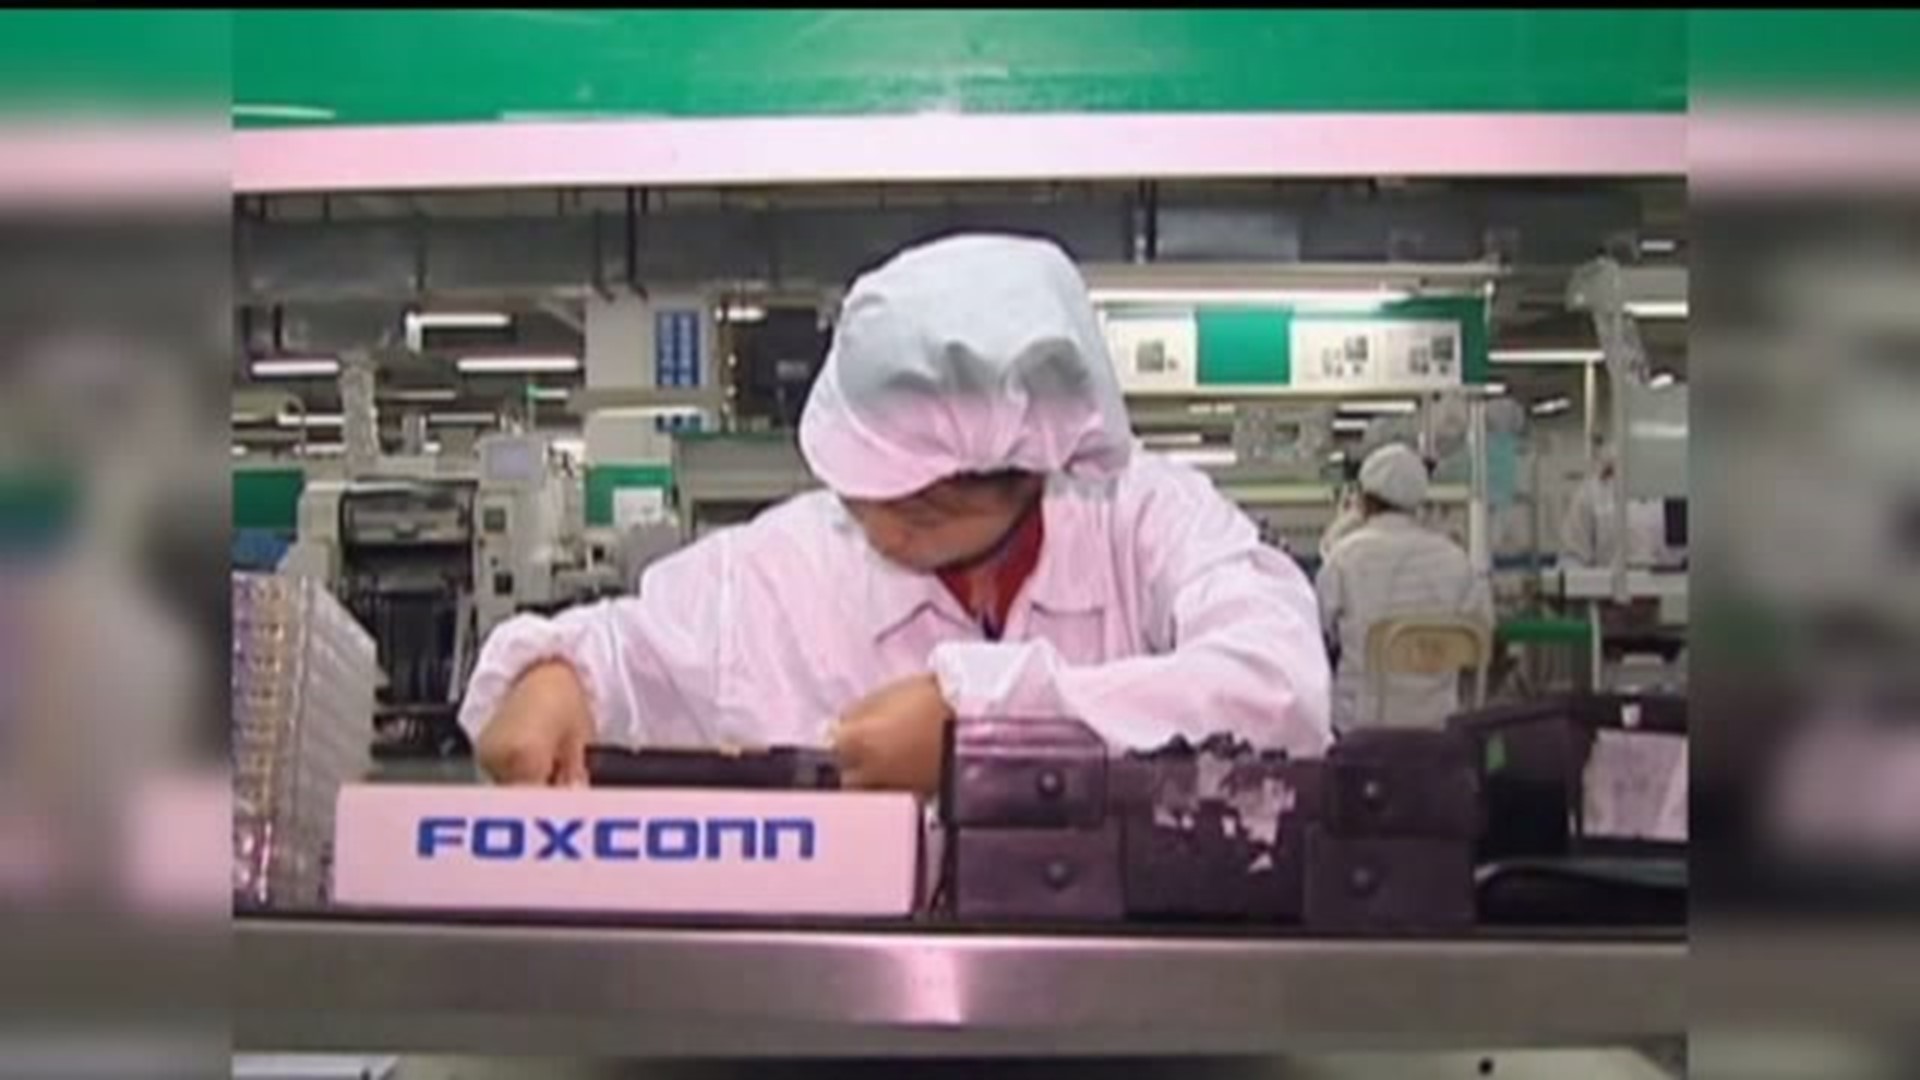 FoxConn considers expanding to US